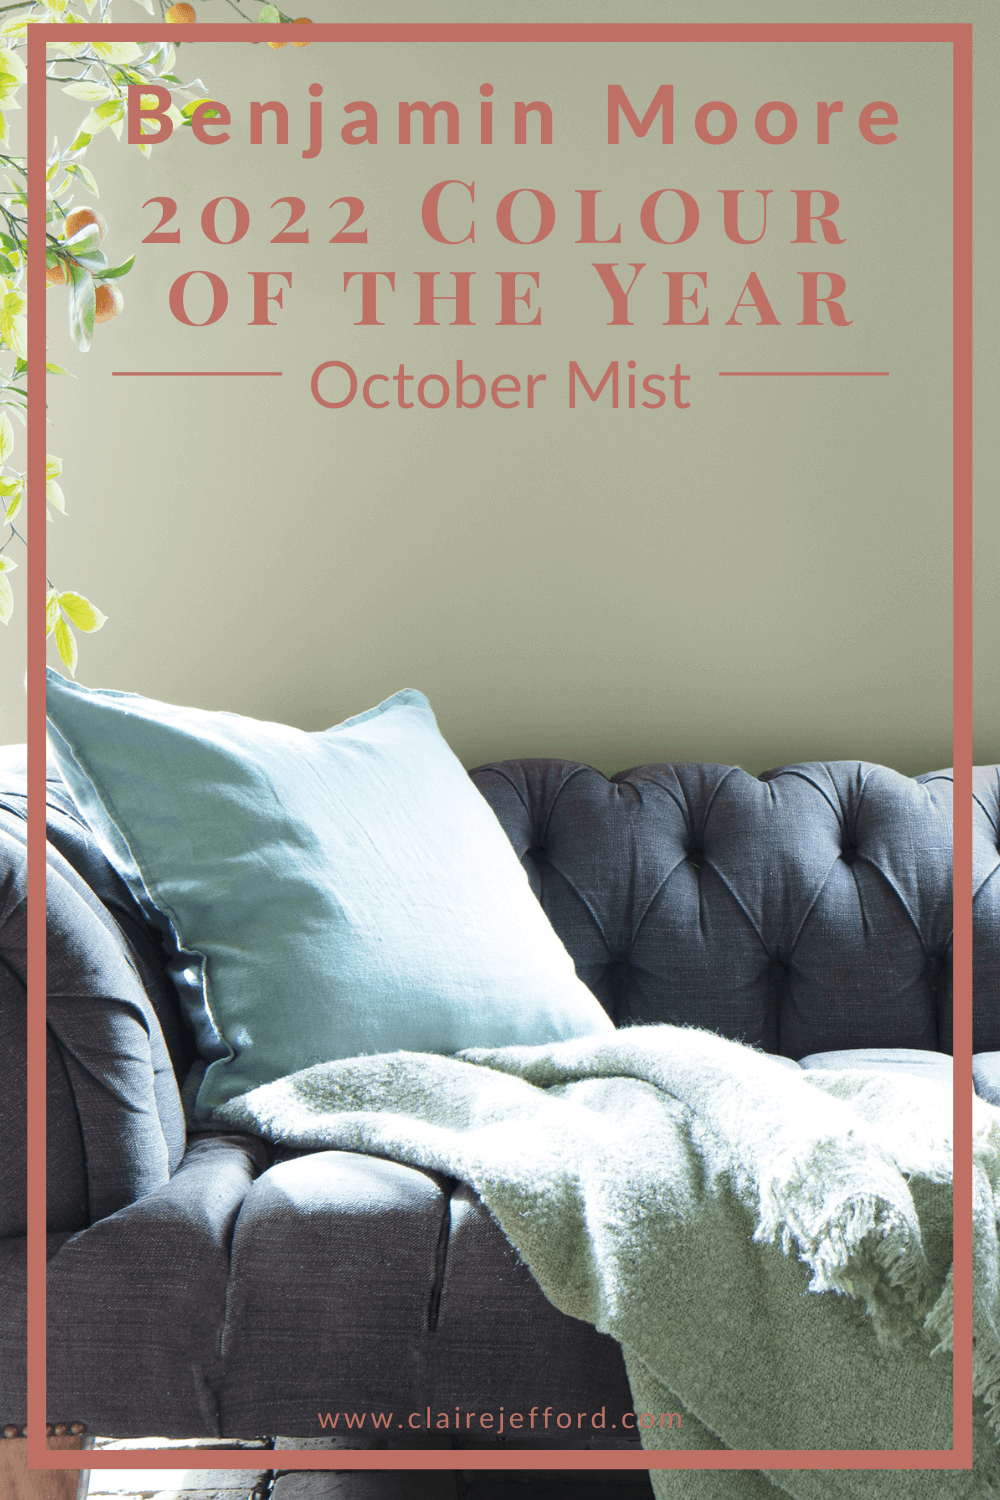 Benjamin Moore Color of the Year 2022 October Mist